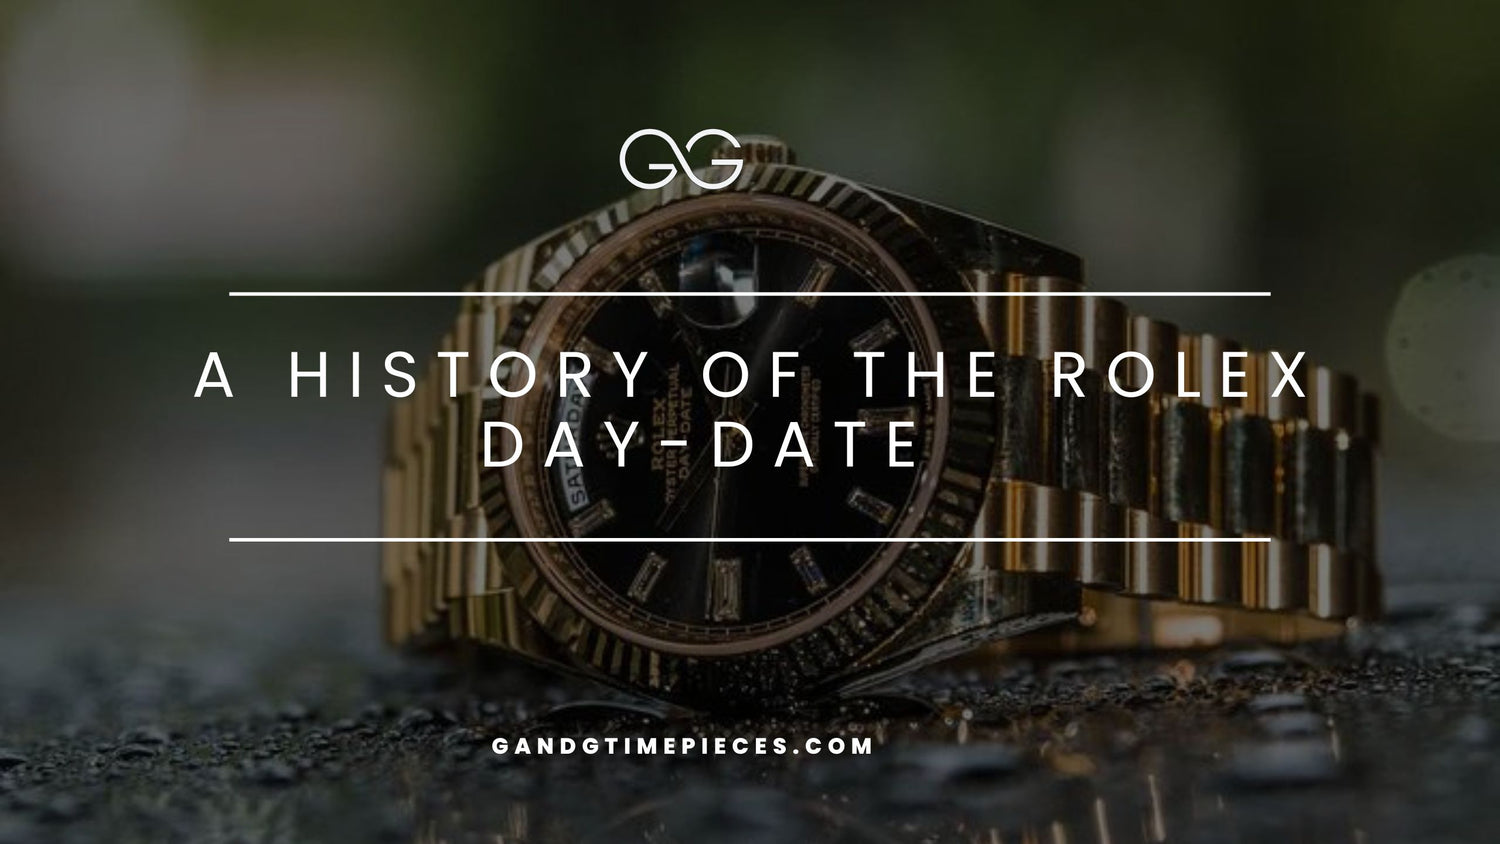 A History of the Rolex Day-Date